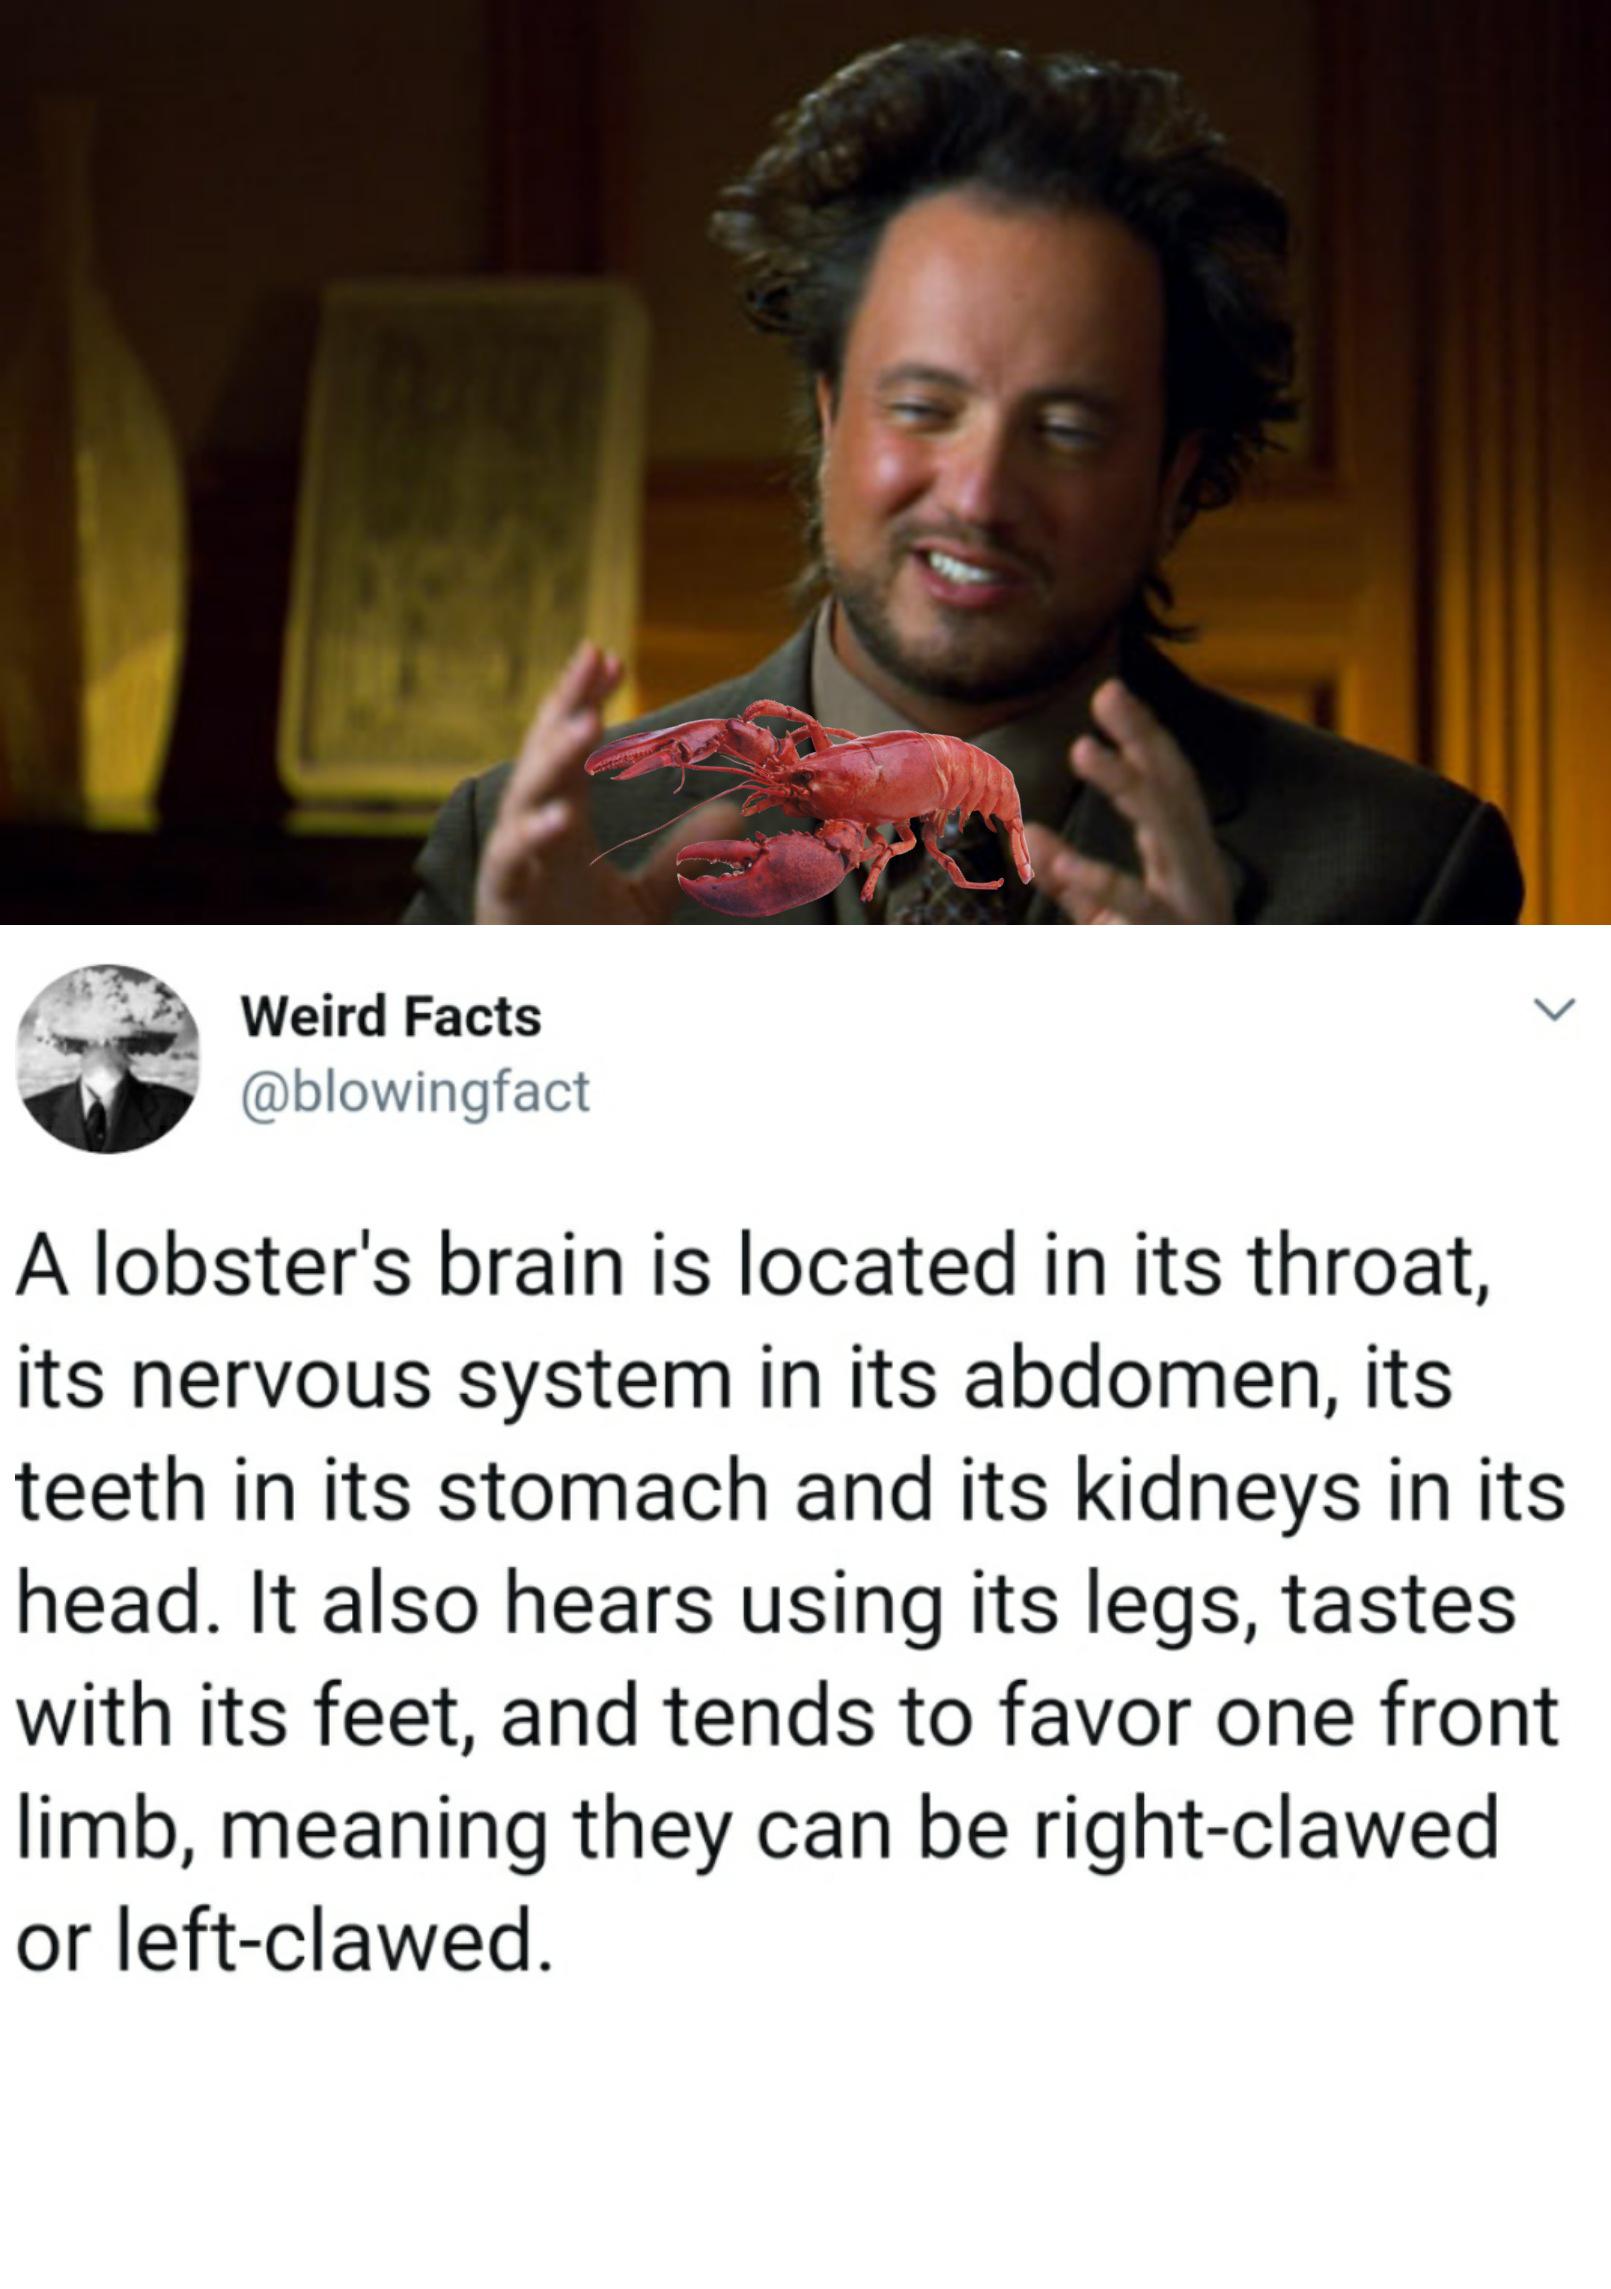 dank memes - photo caption - L Weird Facts A lobster's brain is located in its throat, its nervous system in its abdomen, its teeth in its stomach and its kidneys in its head. It also hears using its legs, tastes with its feet, and tends to favor one fron